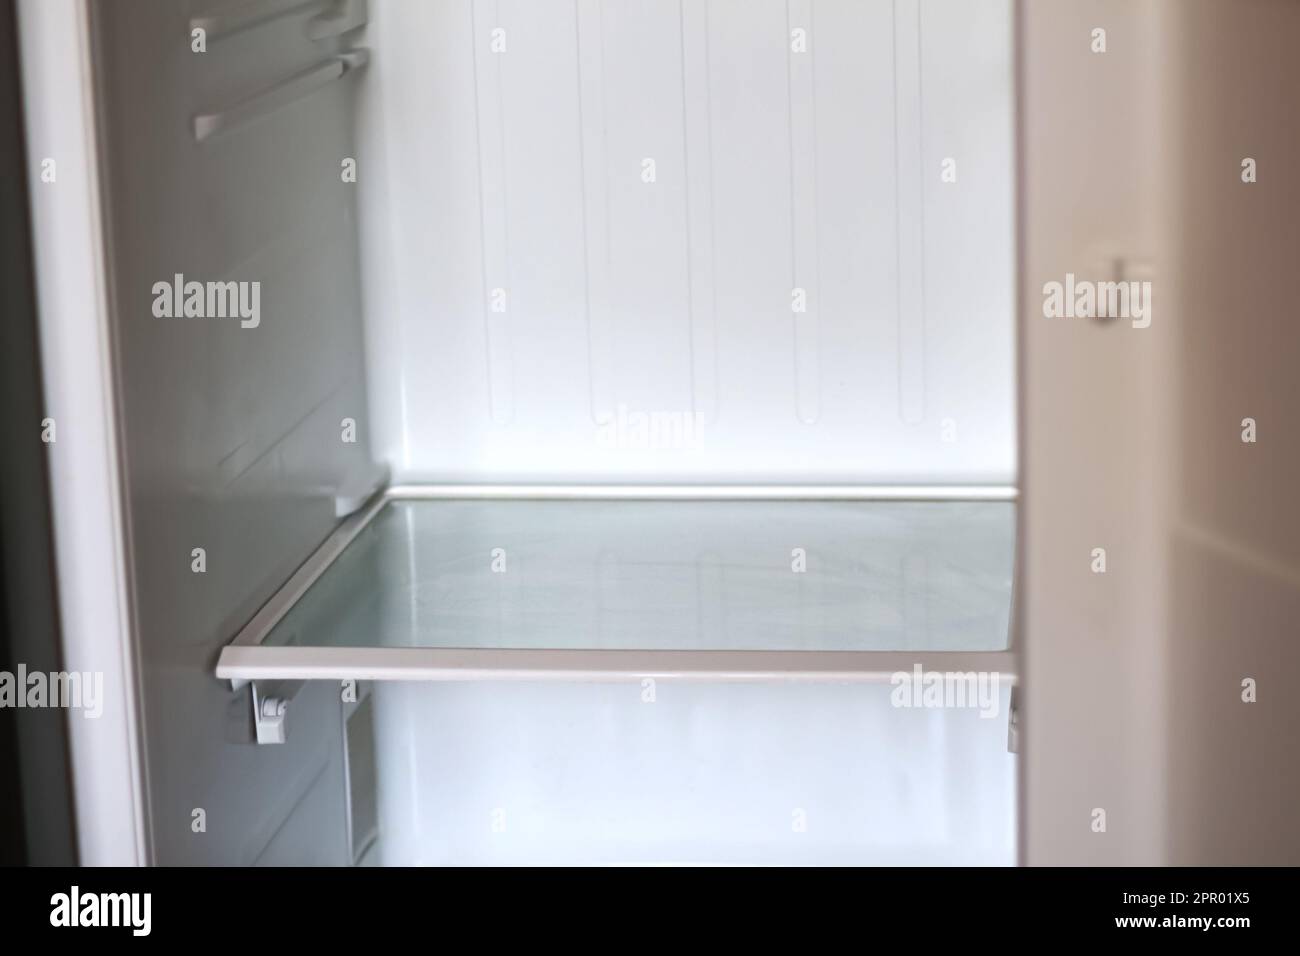 Empty open fridge with shelves, refrigerator. Inside of an empty white fridge. Out of focus Stock Photo